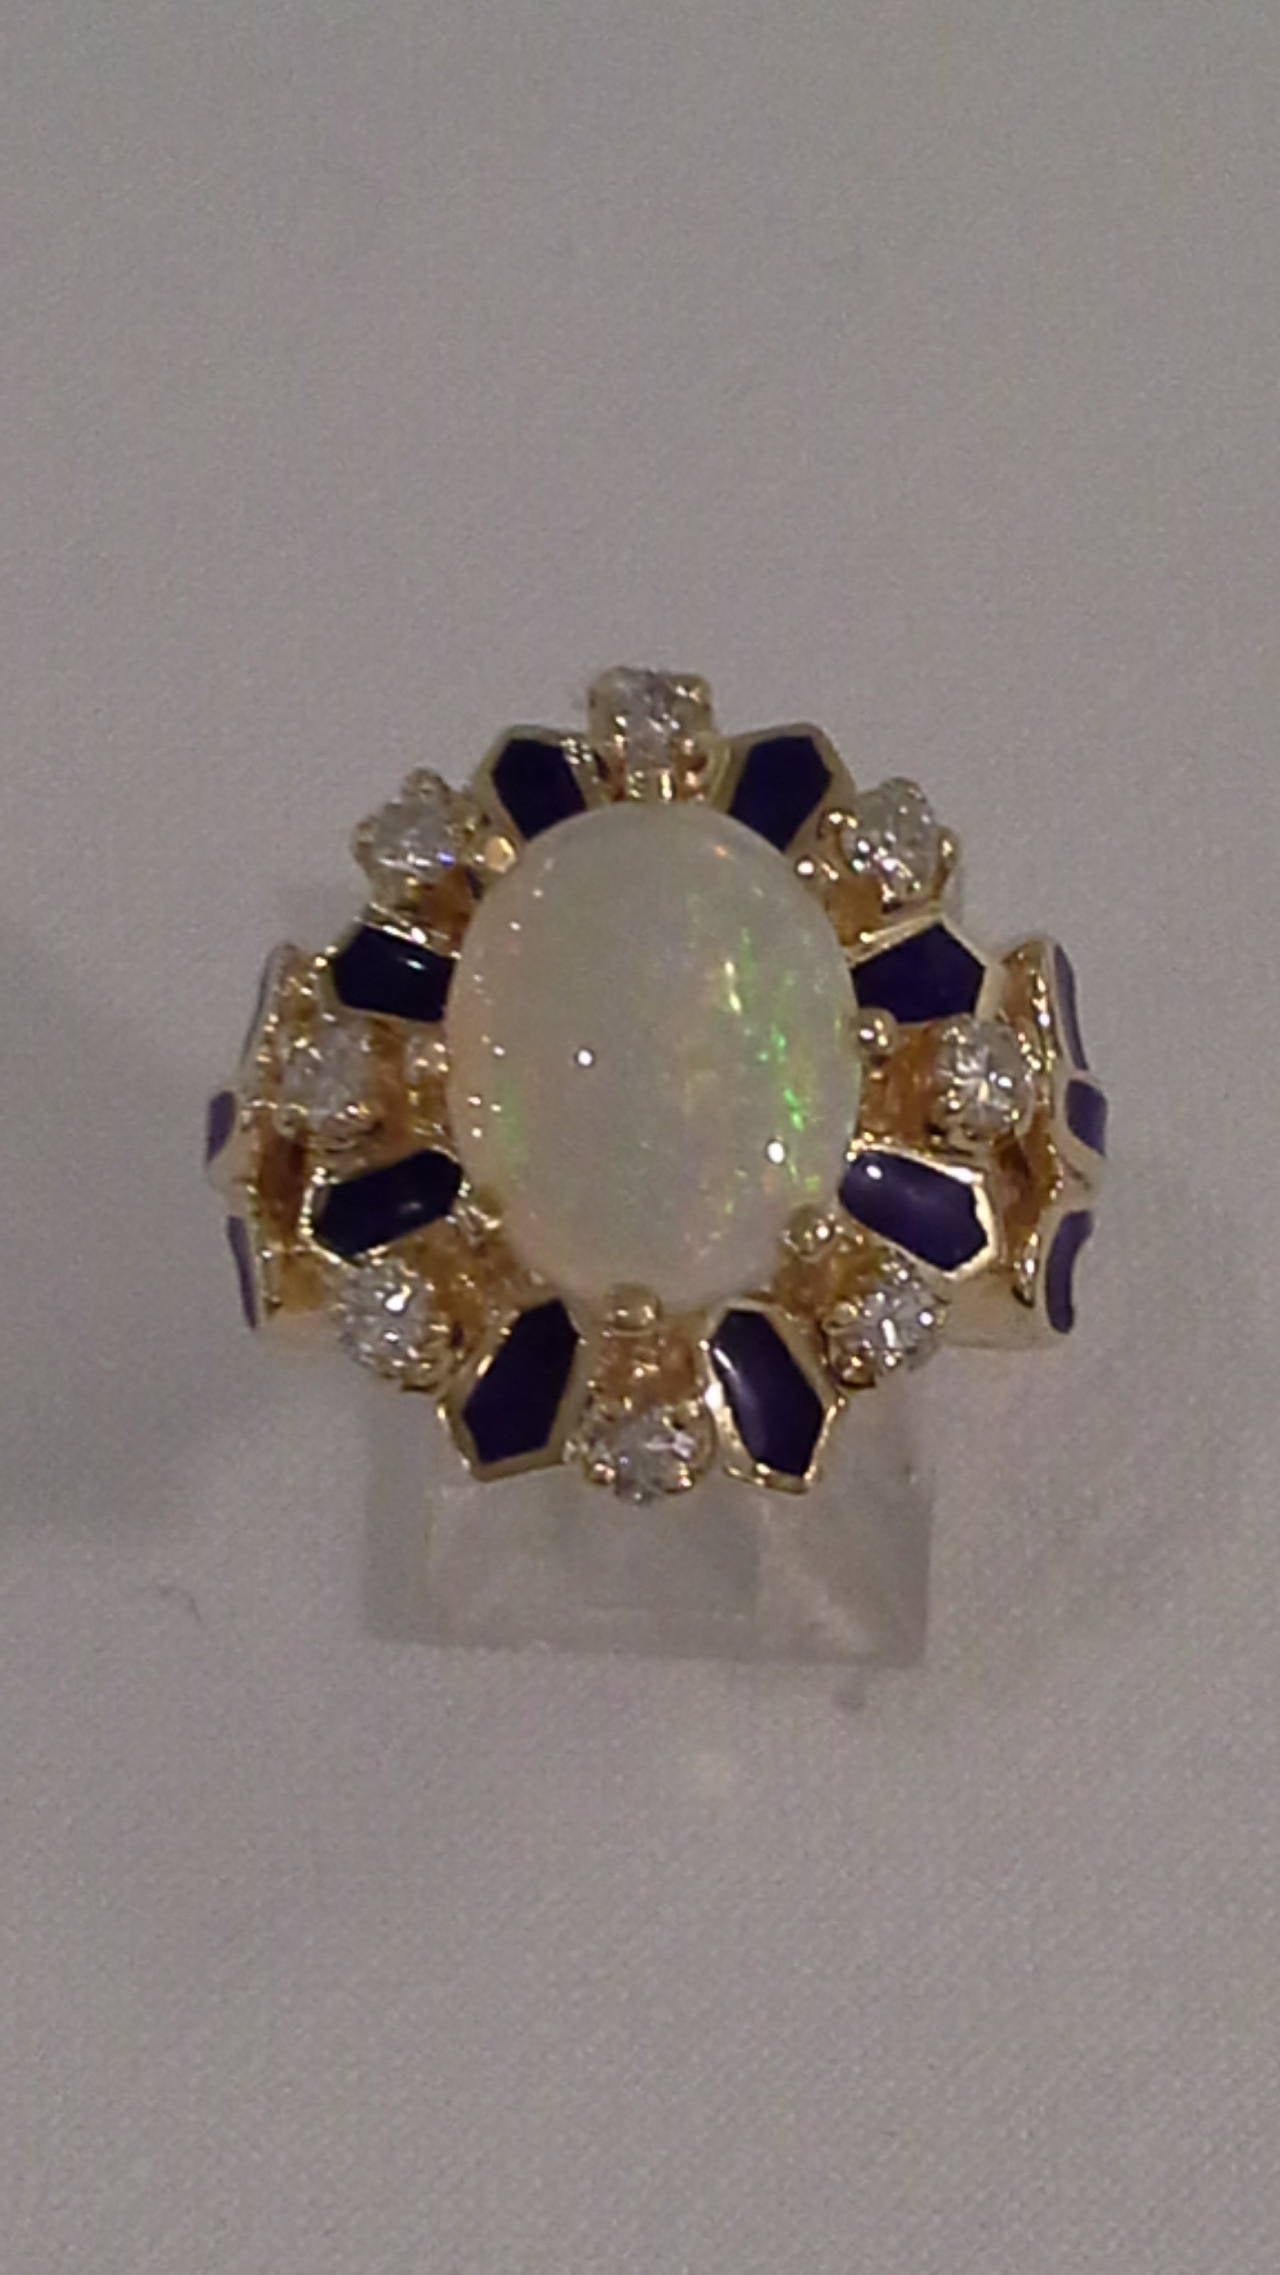 14k Gold, Opal, Diamond & Enamel Cocktail Ring, A nice Ring having a center Fire Opal, surrounded by 8 diamonds and accented with a dark blue enamel. The opal is approximately 2.5 carats, Diamond total is approximately .50 carats, with blue